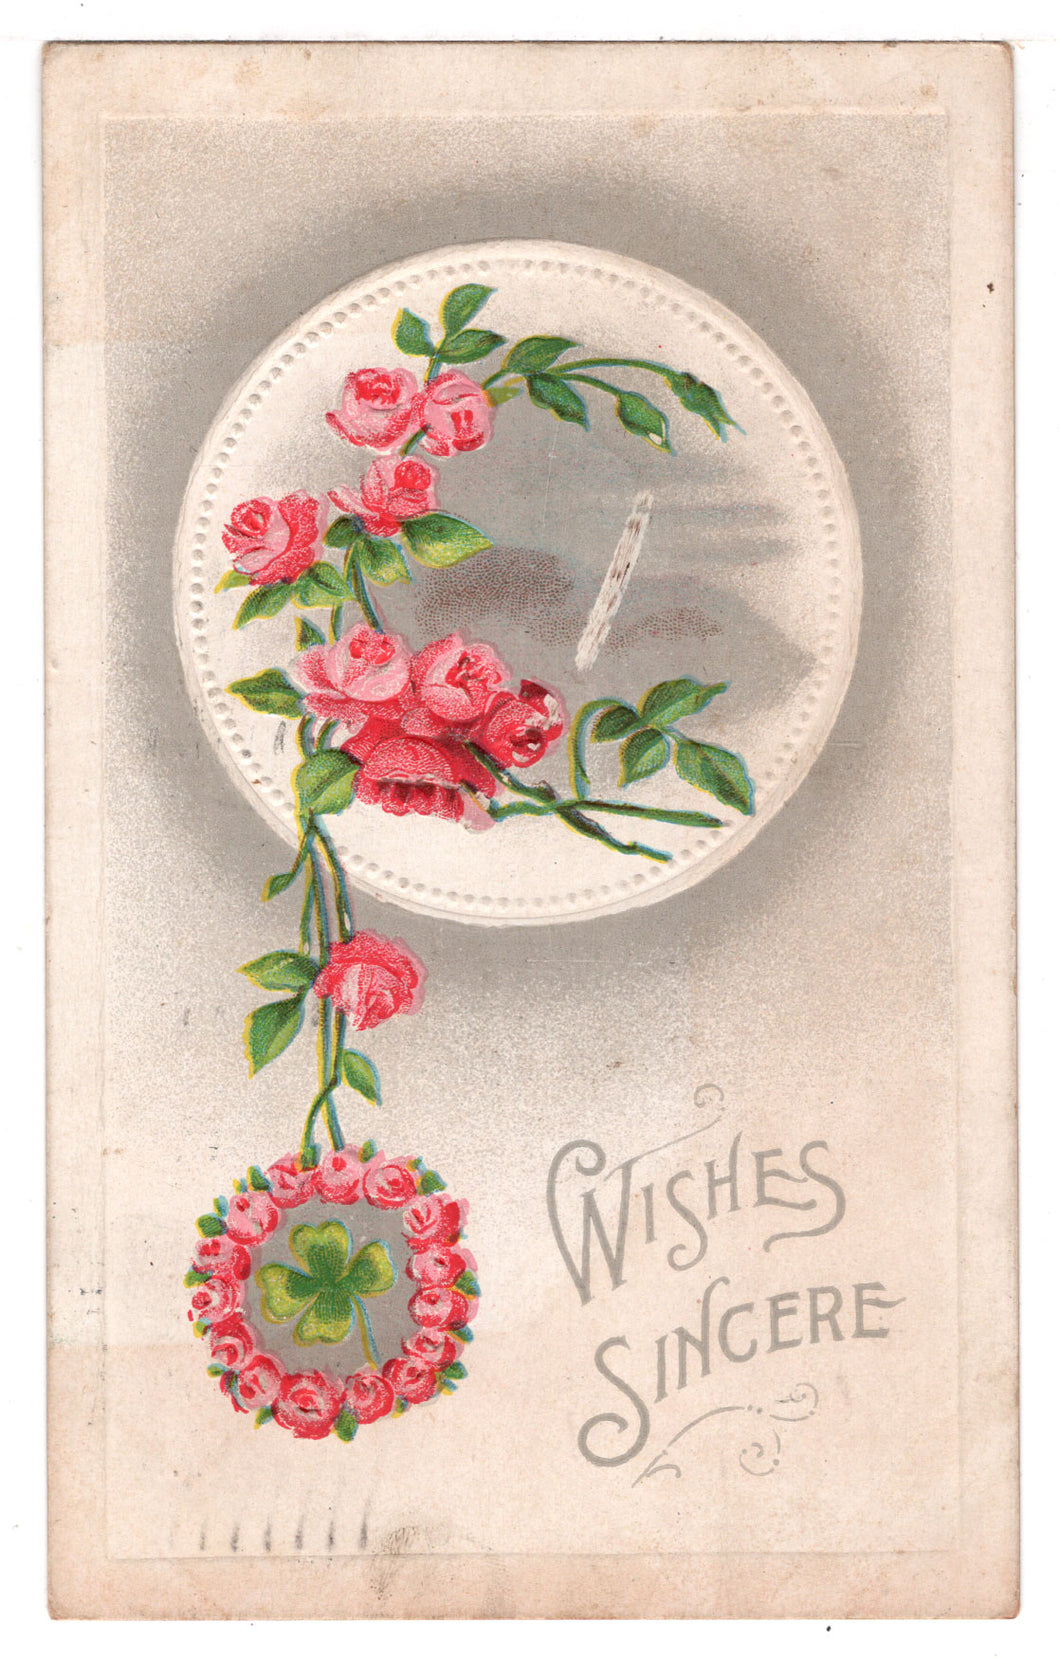 Wishes Sincere Vintage Original Postcard # 4591 - Post Marked February 19, 1912